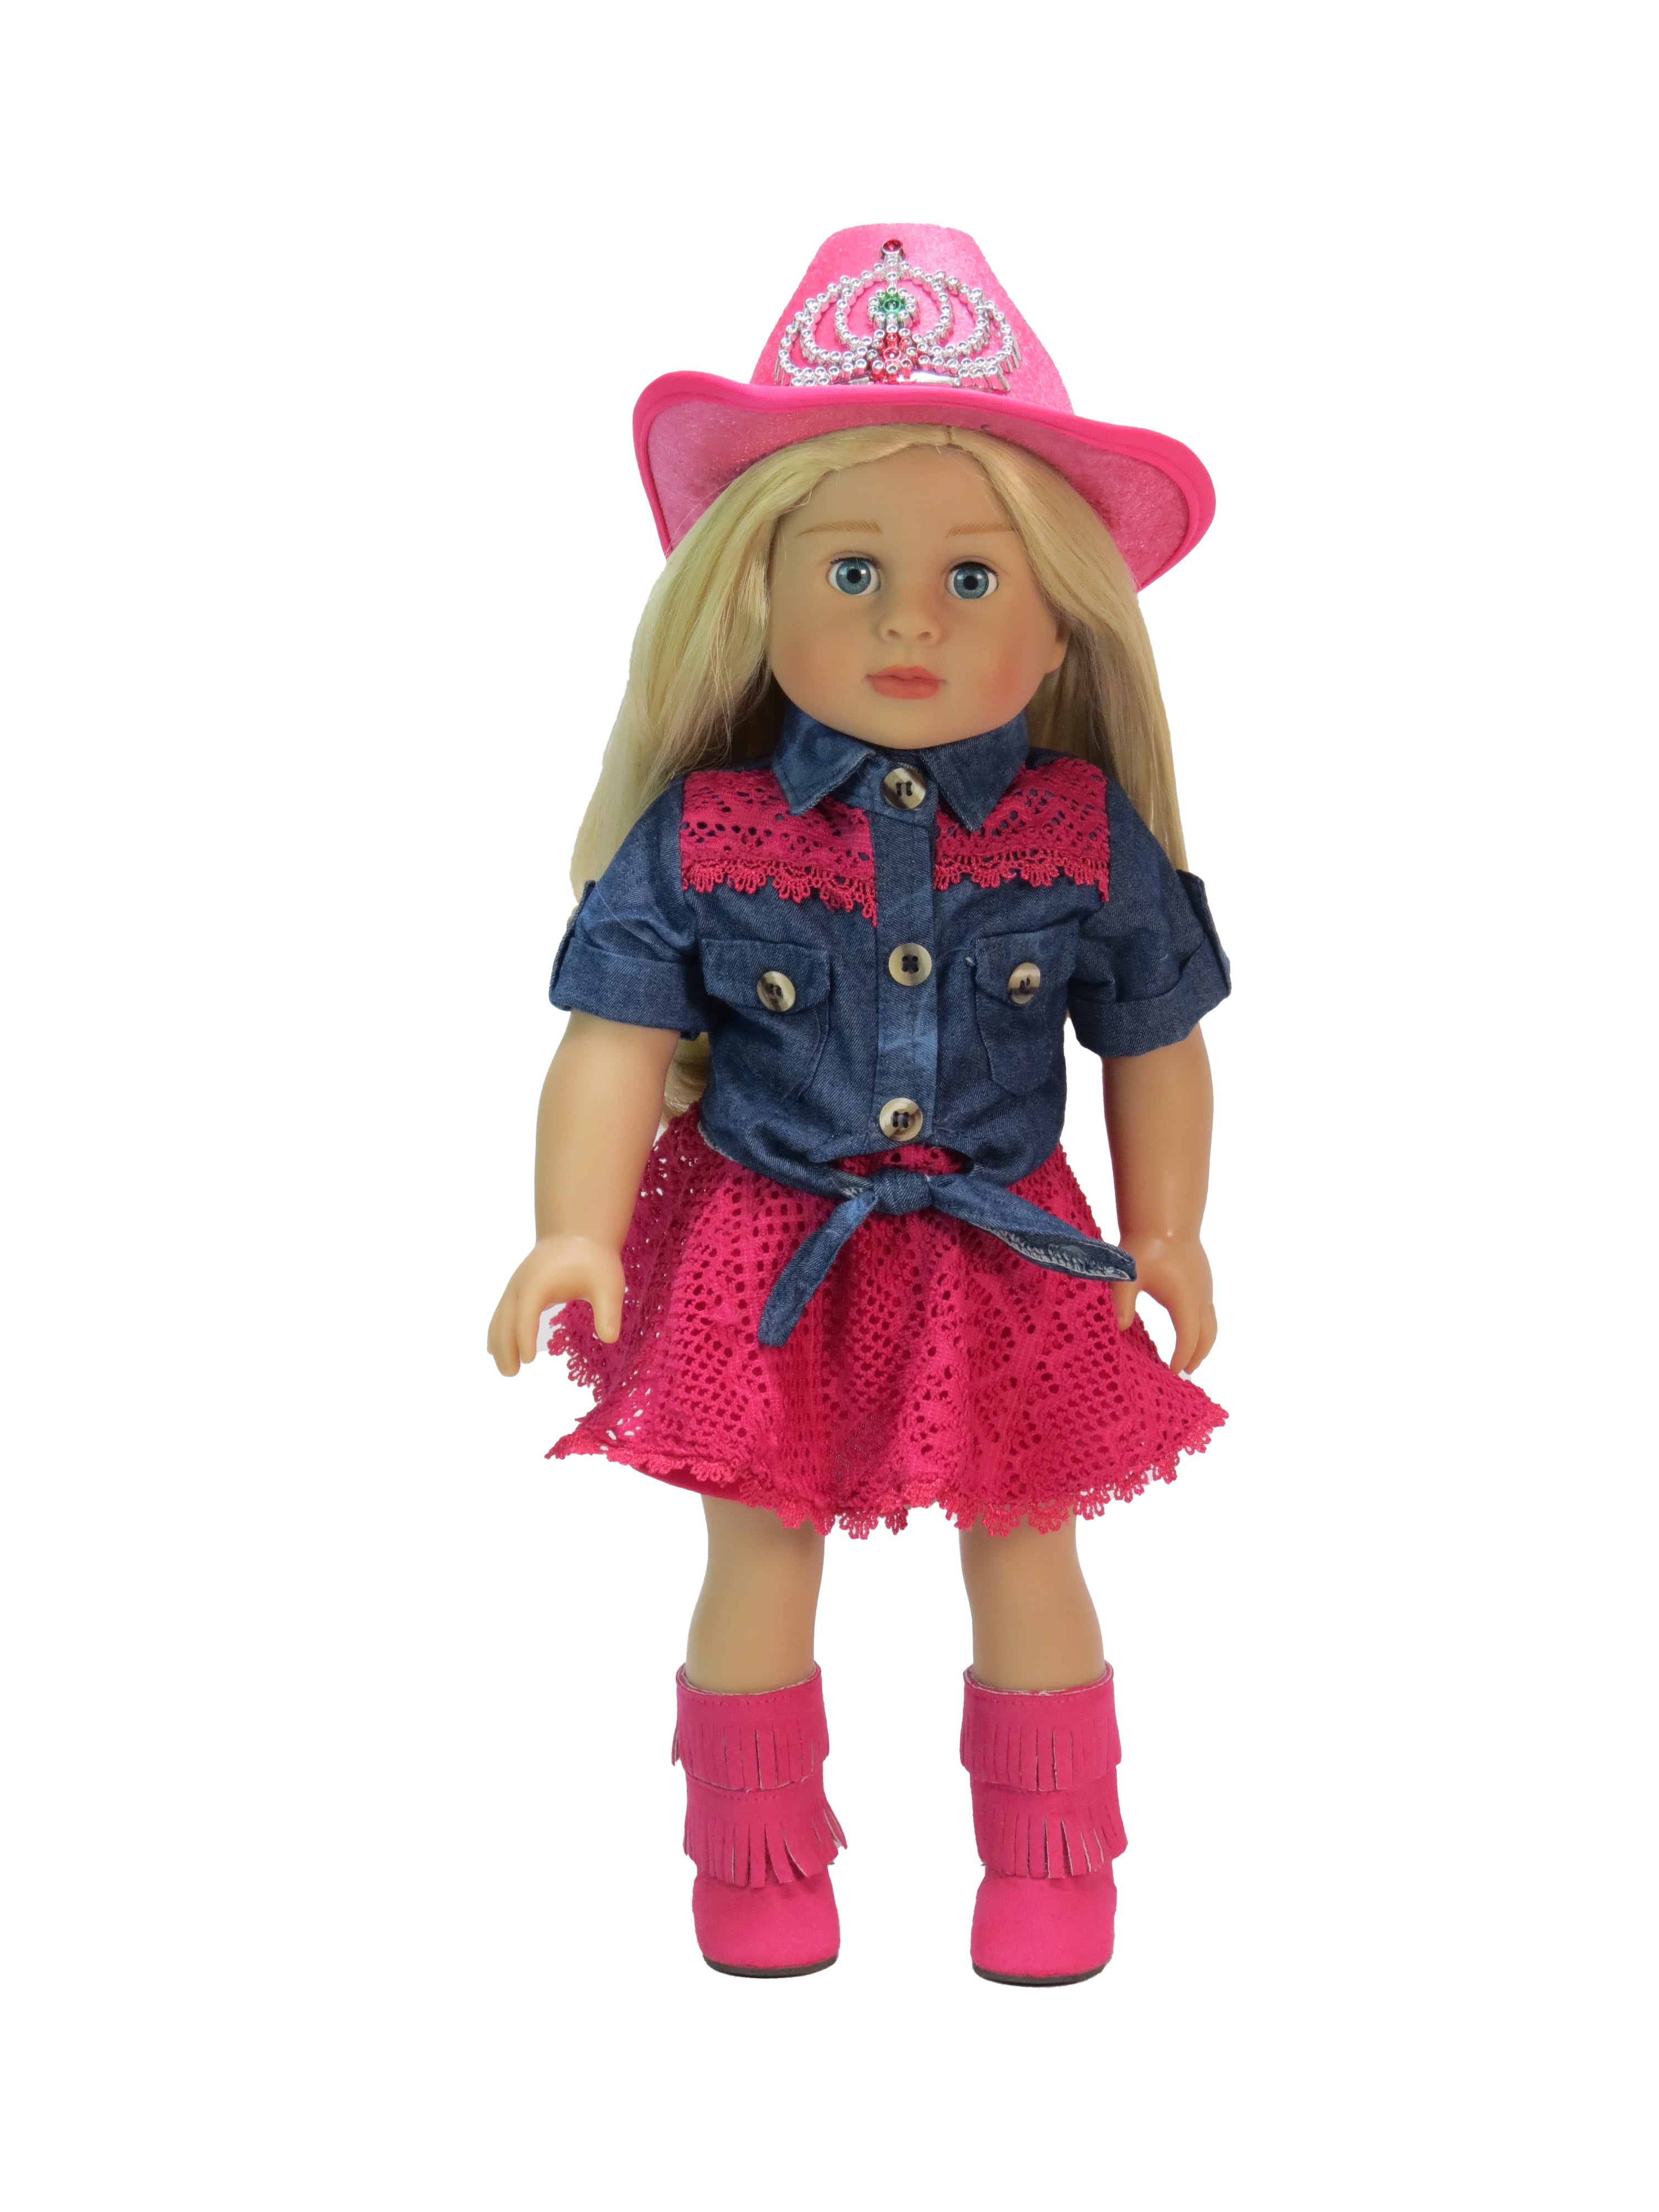 Details about   Pink Western Cowgirl Cowboy Jacket Top Jeans & Boots fit American Girl Size Doll 